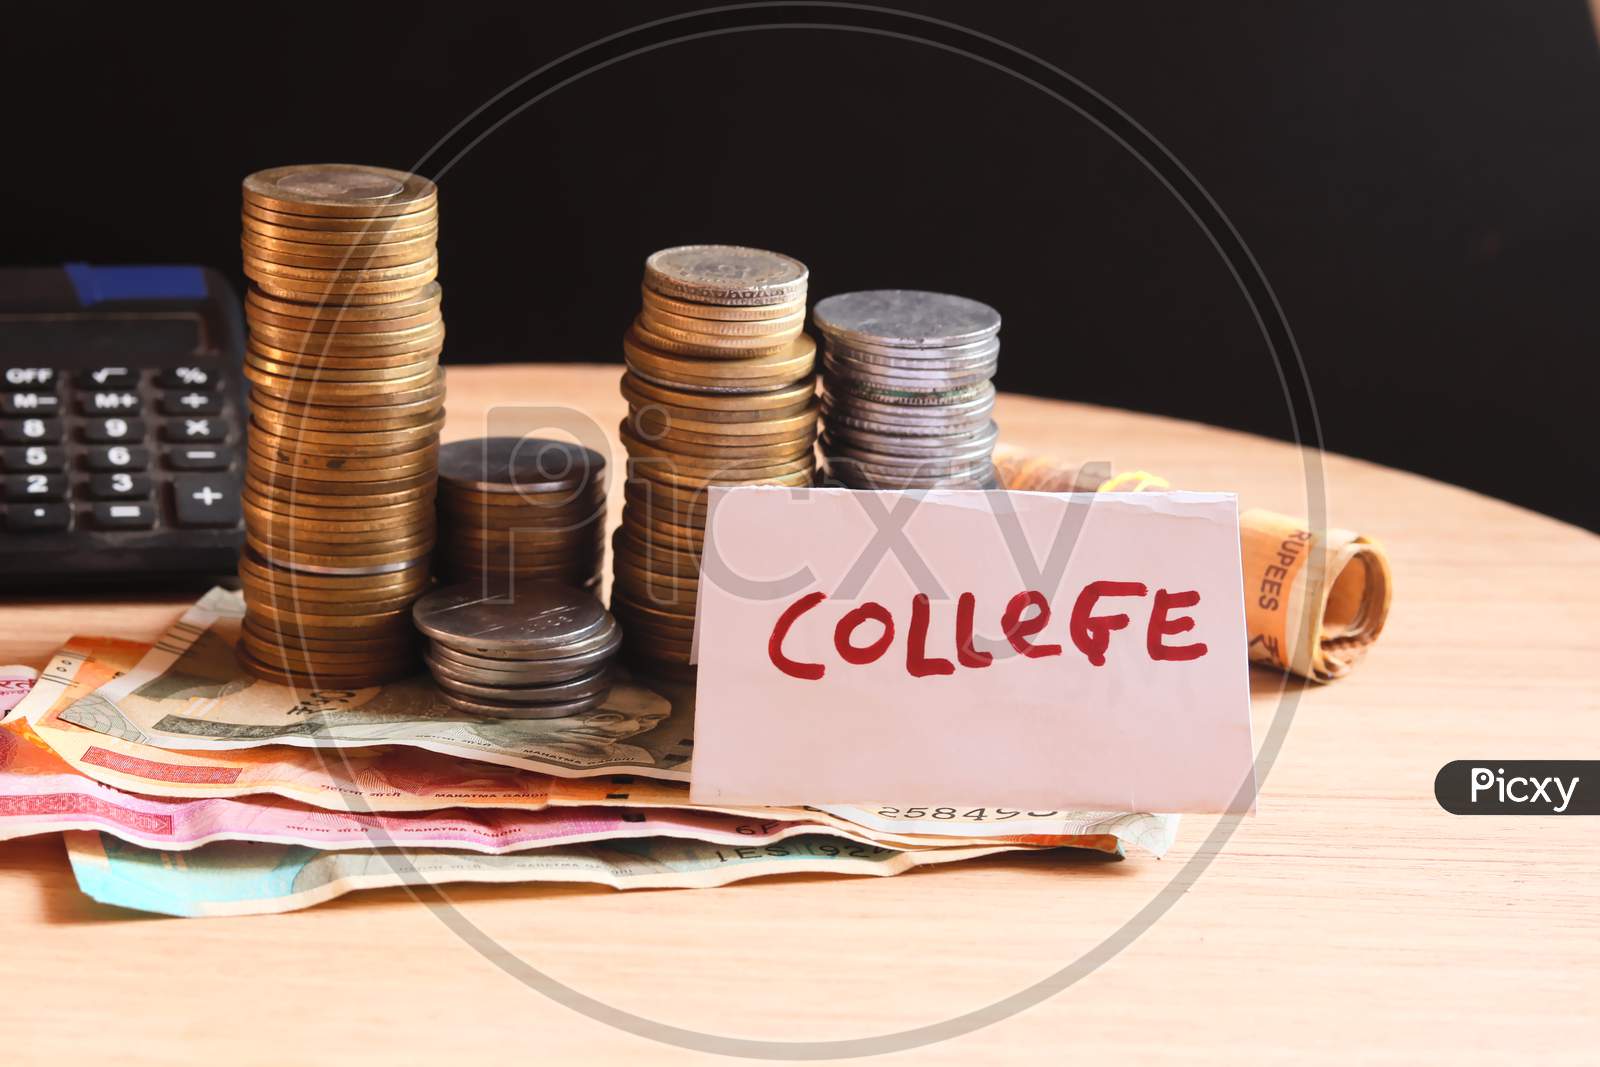 Jar With Label College And Money On The Table,Money Saving,Man Hand Holding Stack Of Coins Money And Glass Jar With Coins And Graduates Hat Label As Education,Education Or Savings Concept,